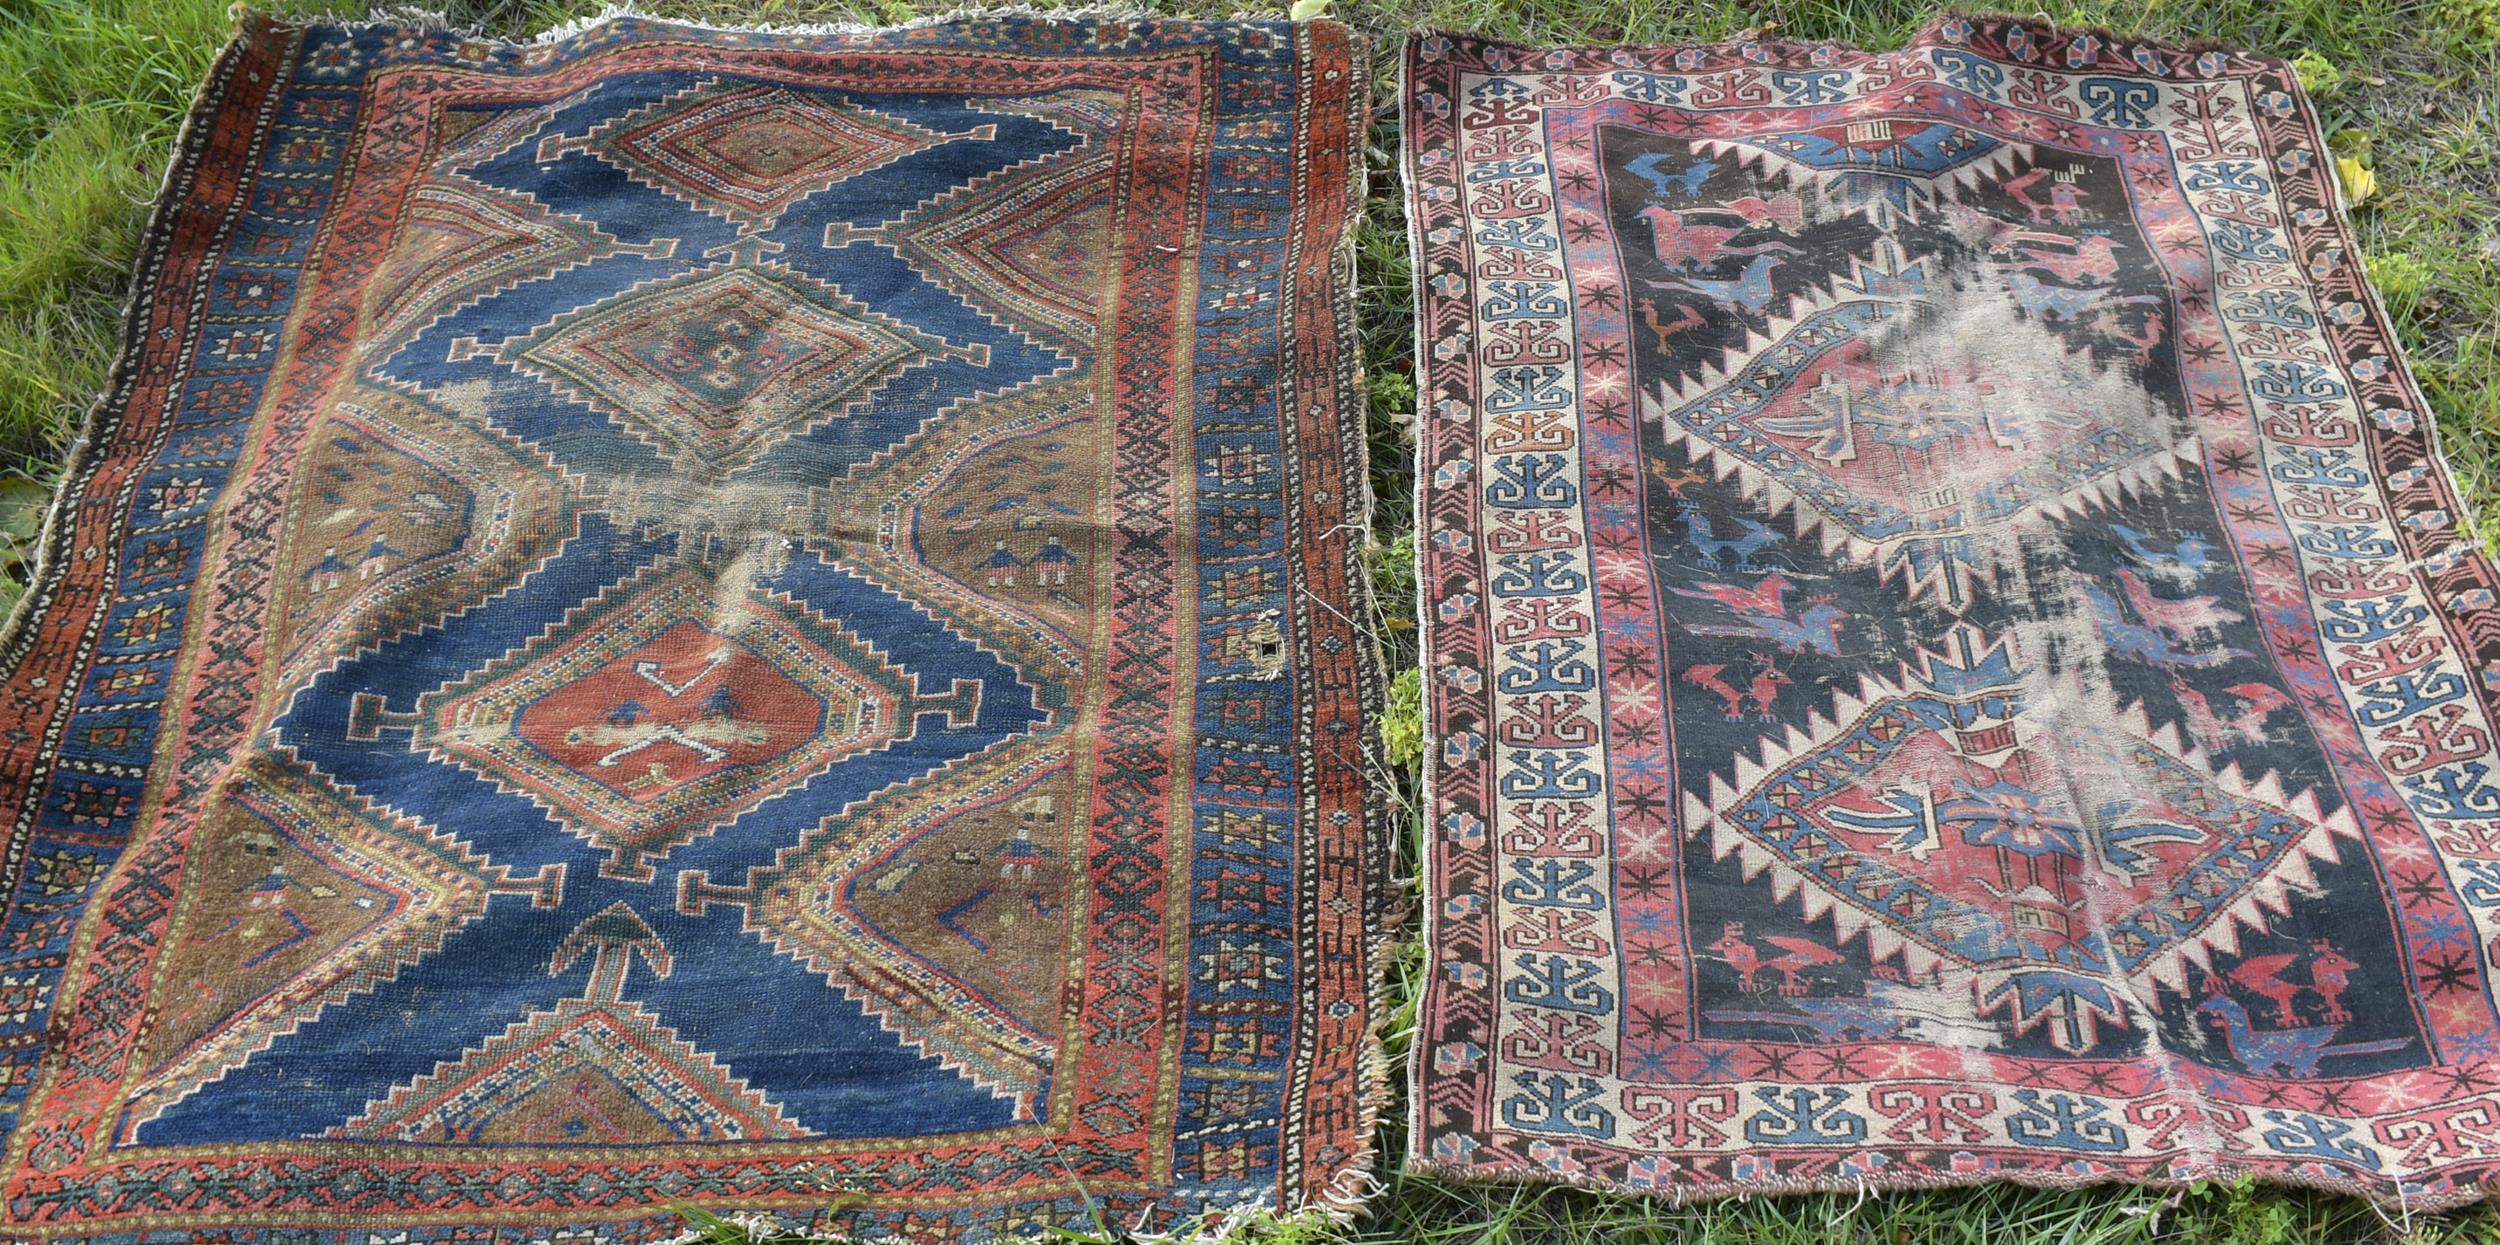 TWO WORN ANTIQUE SCATTER RUGS.